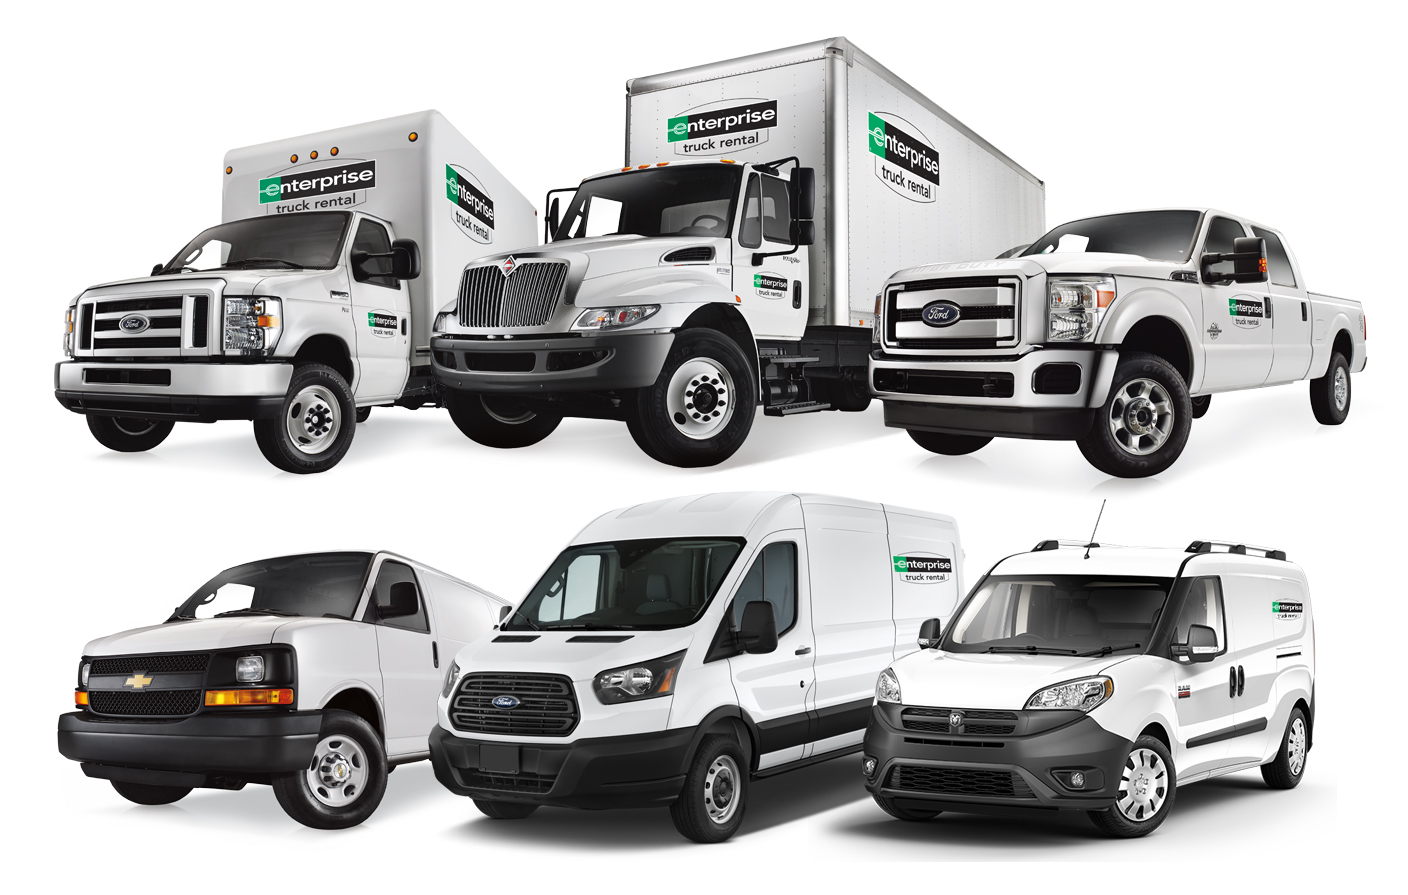 Enterprise Truck Rental opens its first location in Hawaii near main airport and cruise port 